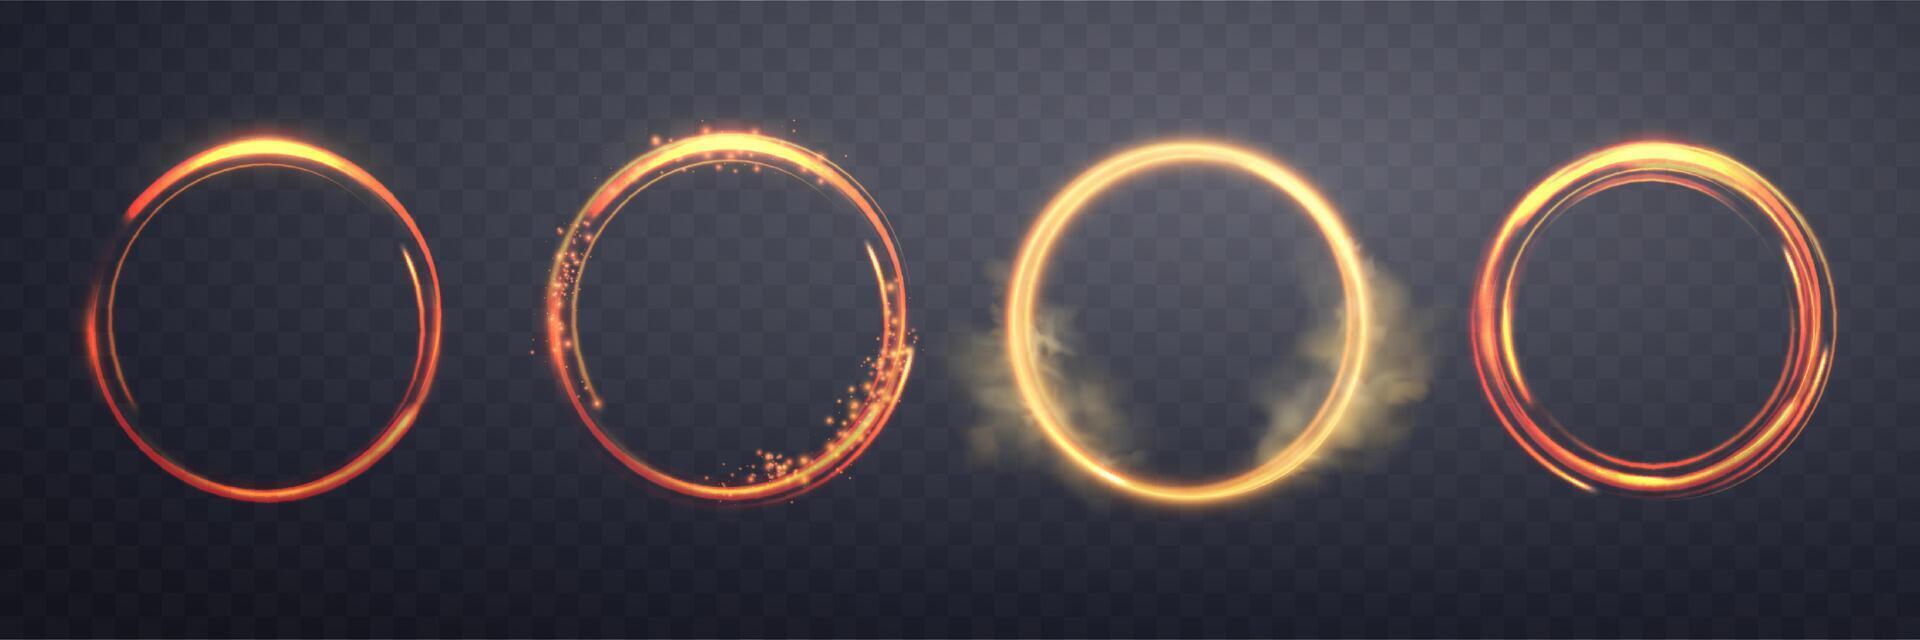 Glowing orange magic rings. Neon realistic energy flare halo rings. Abstract light effect on a dark background. Vector illustration.